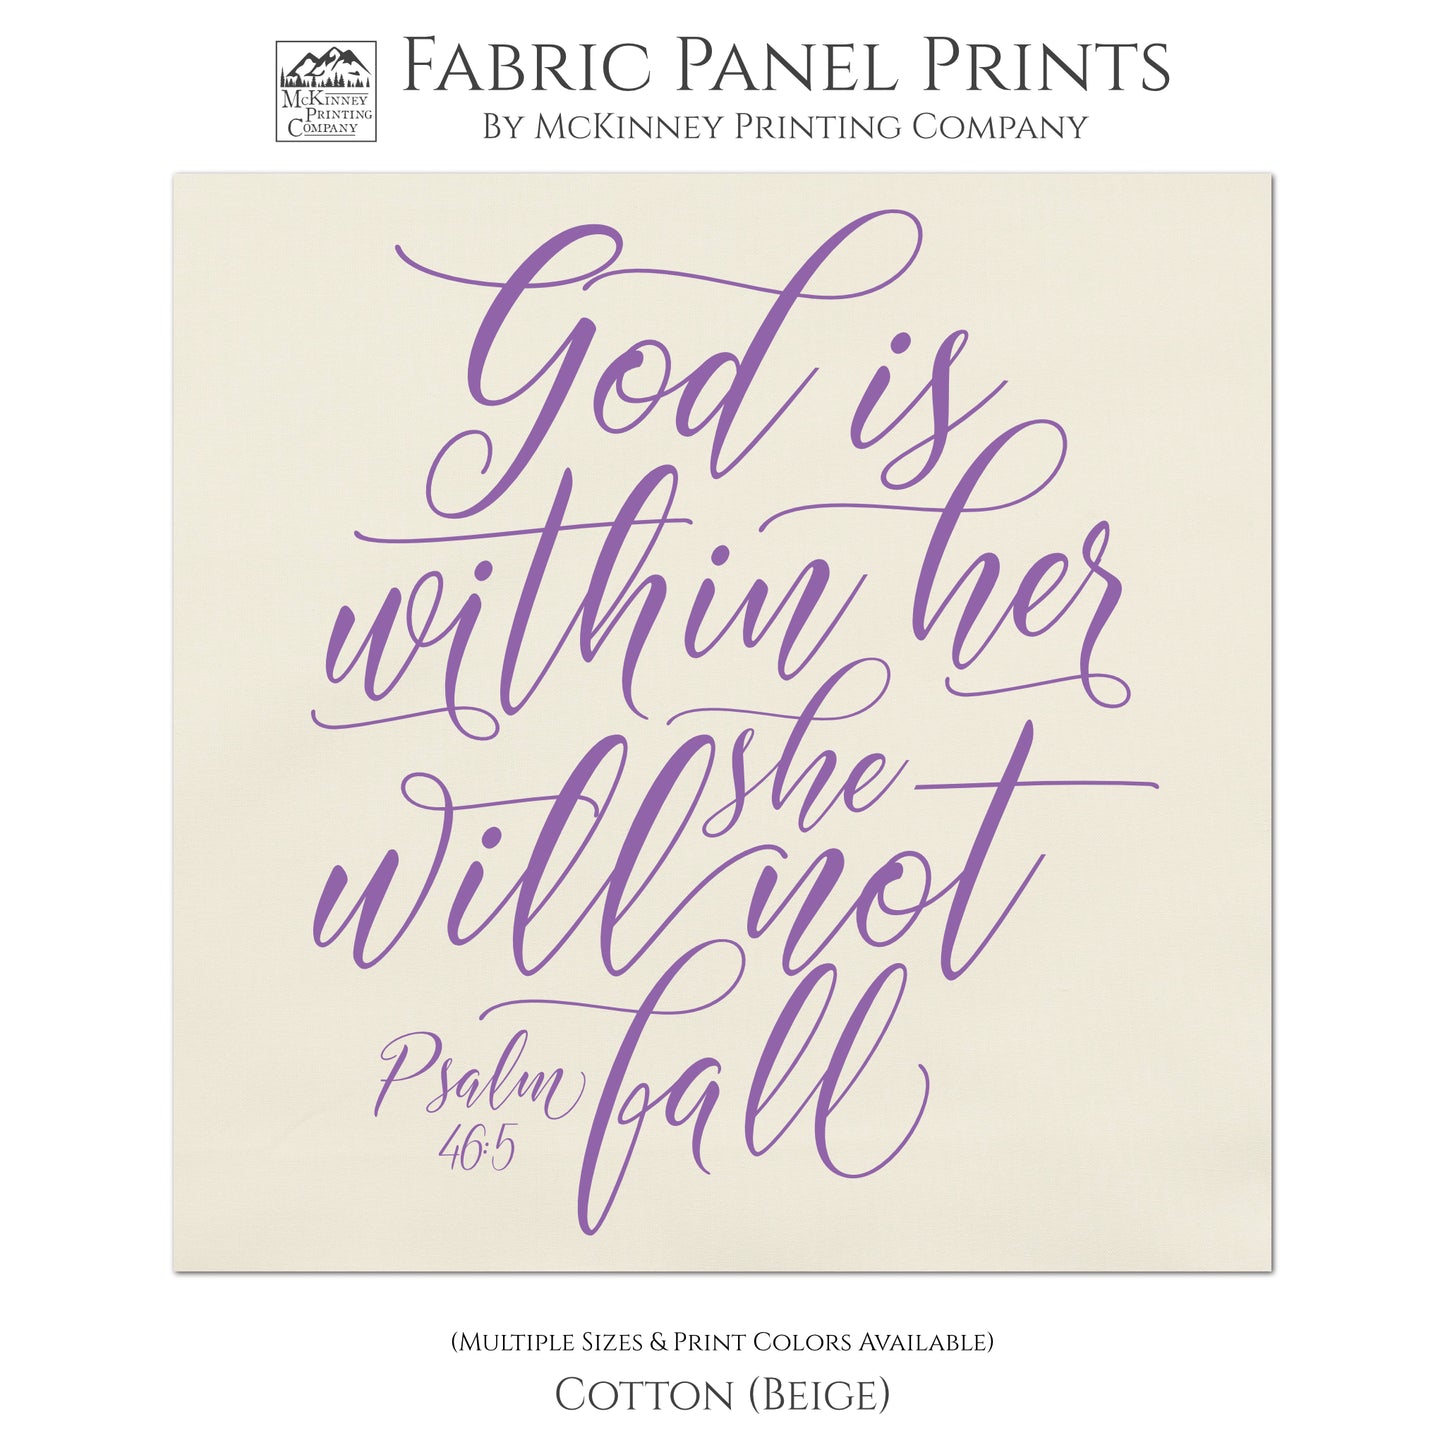 God is within her she will not fall - Psalm 46 5 - Fabric Panel Print, Scripture Fabric, Bible Verse Wall Art - Cotton